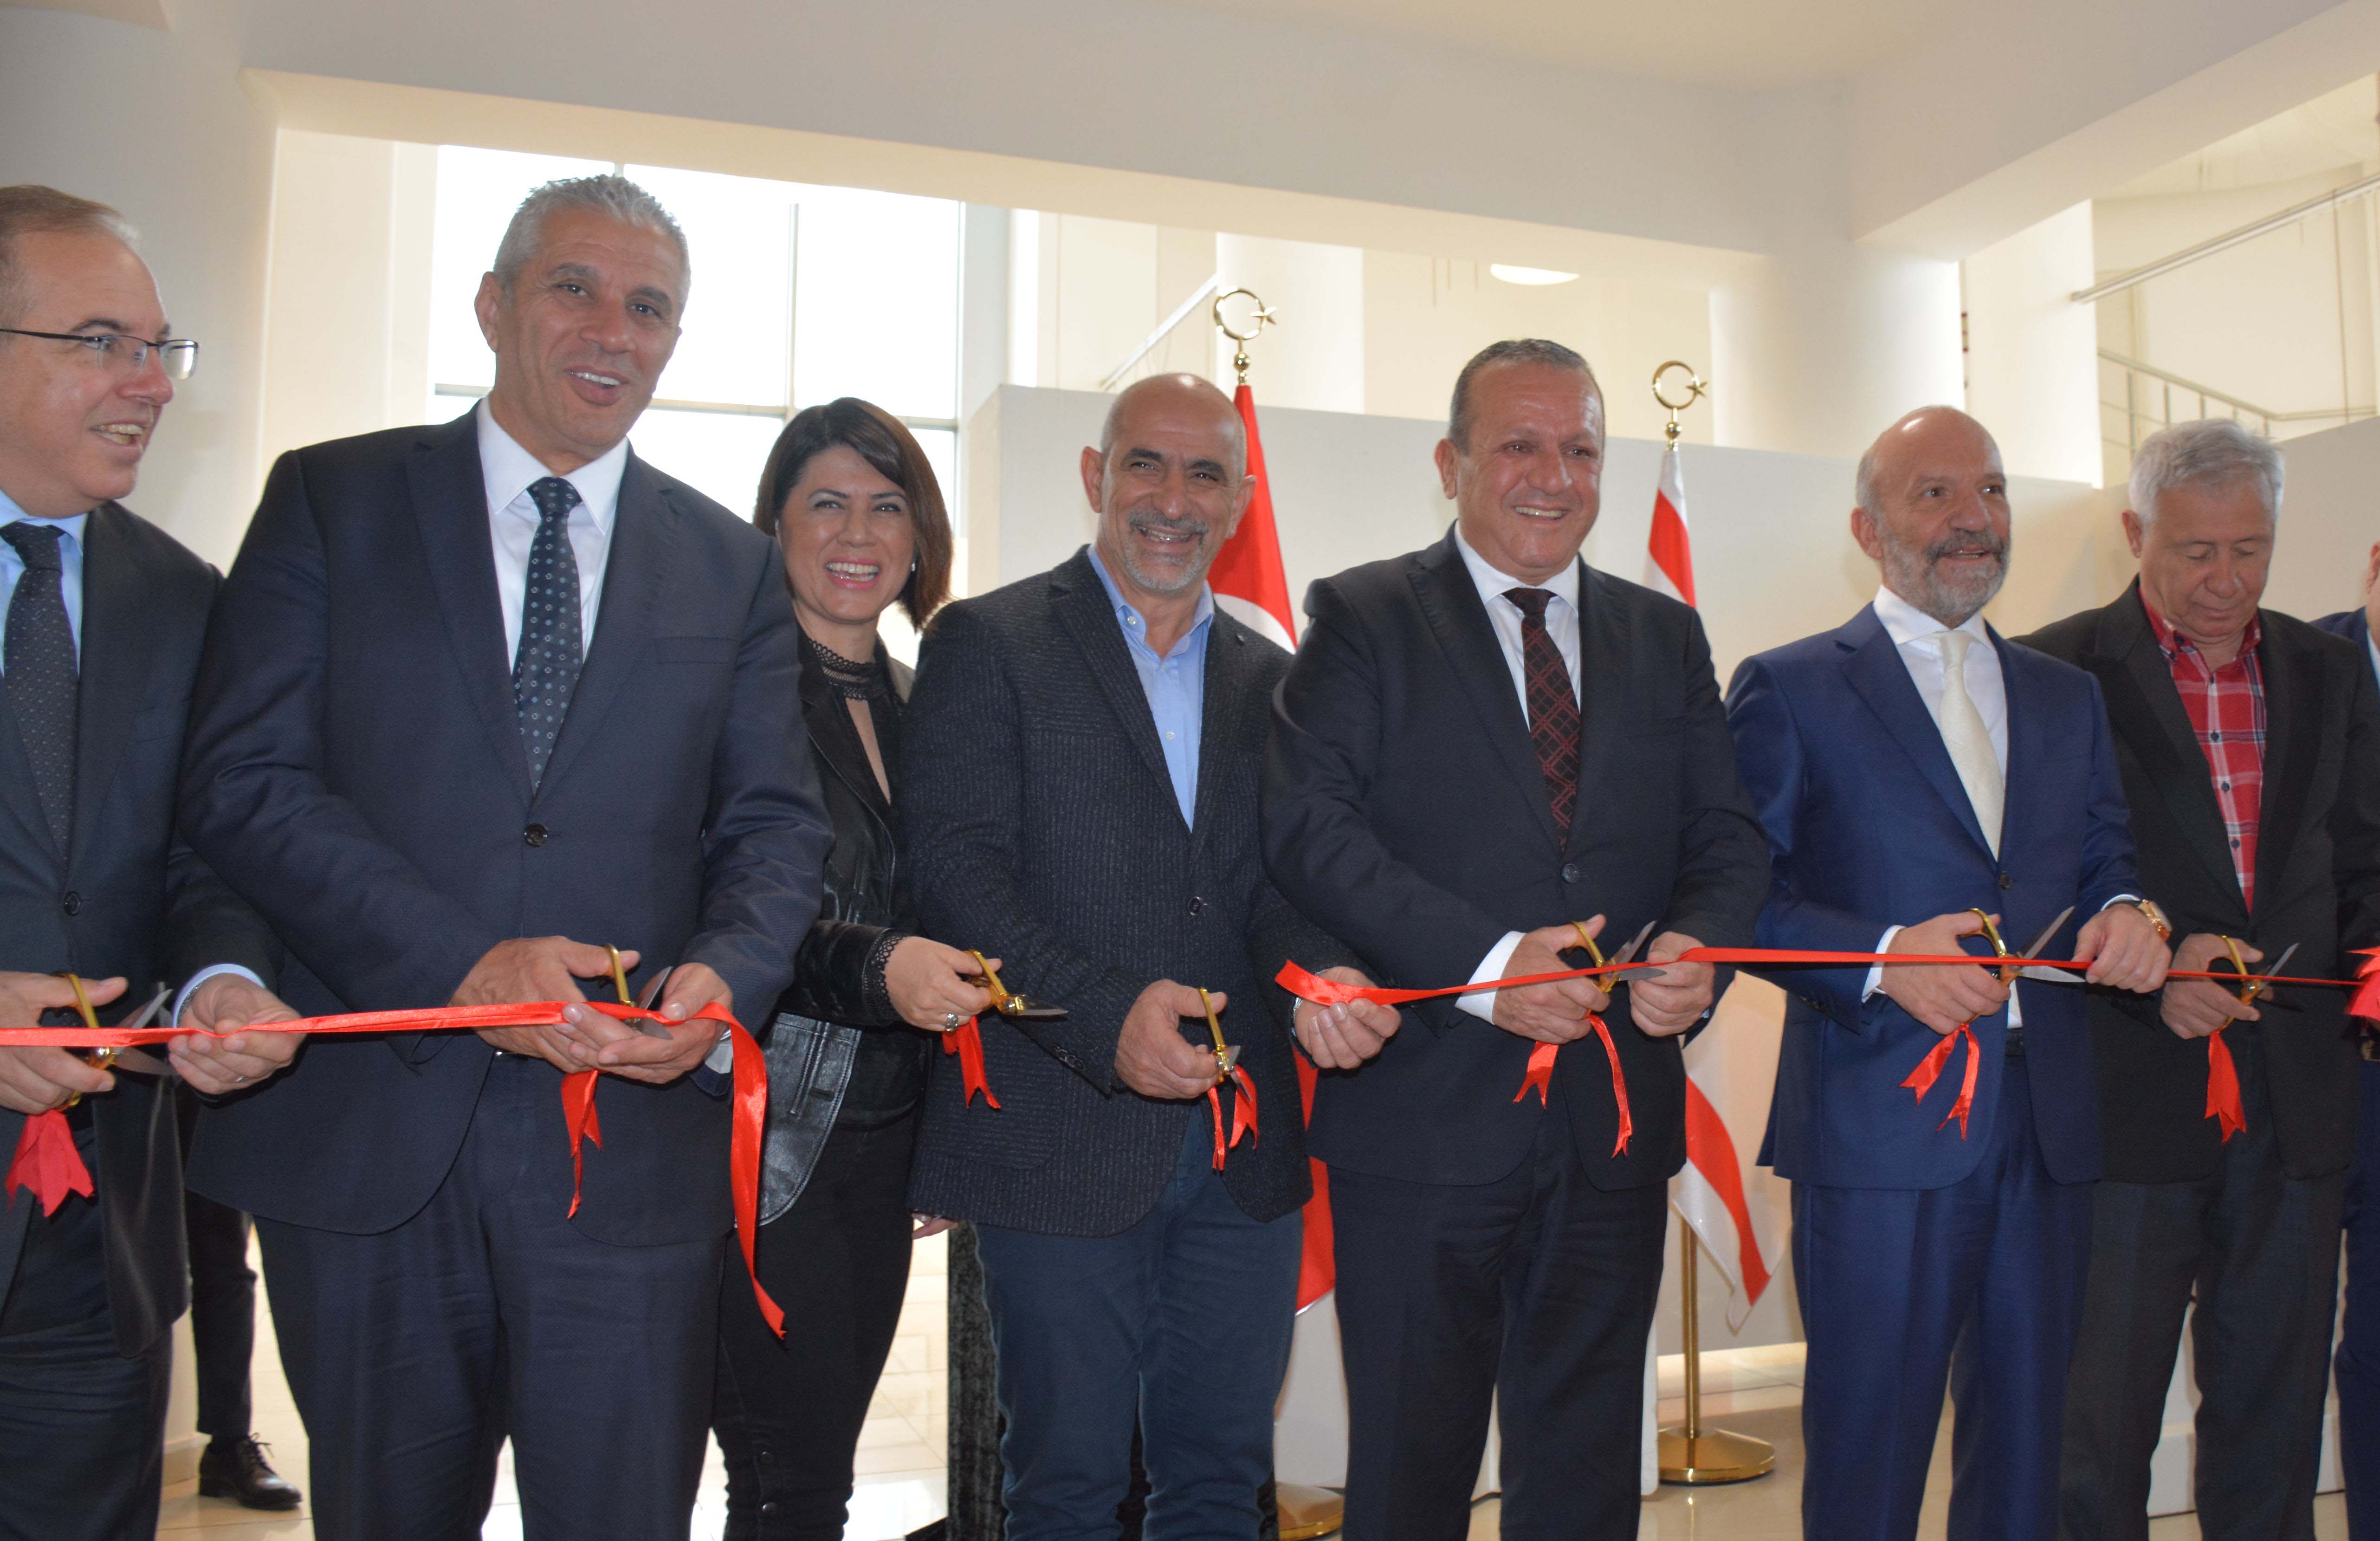 Yücel Yazgın’s Print Painting Exhibition titled “Cypriot Comments” consisting of 60 Works prepared by using different painting techniques opened by Minister of Tourism and Environment  Fikri Ataoğlu